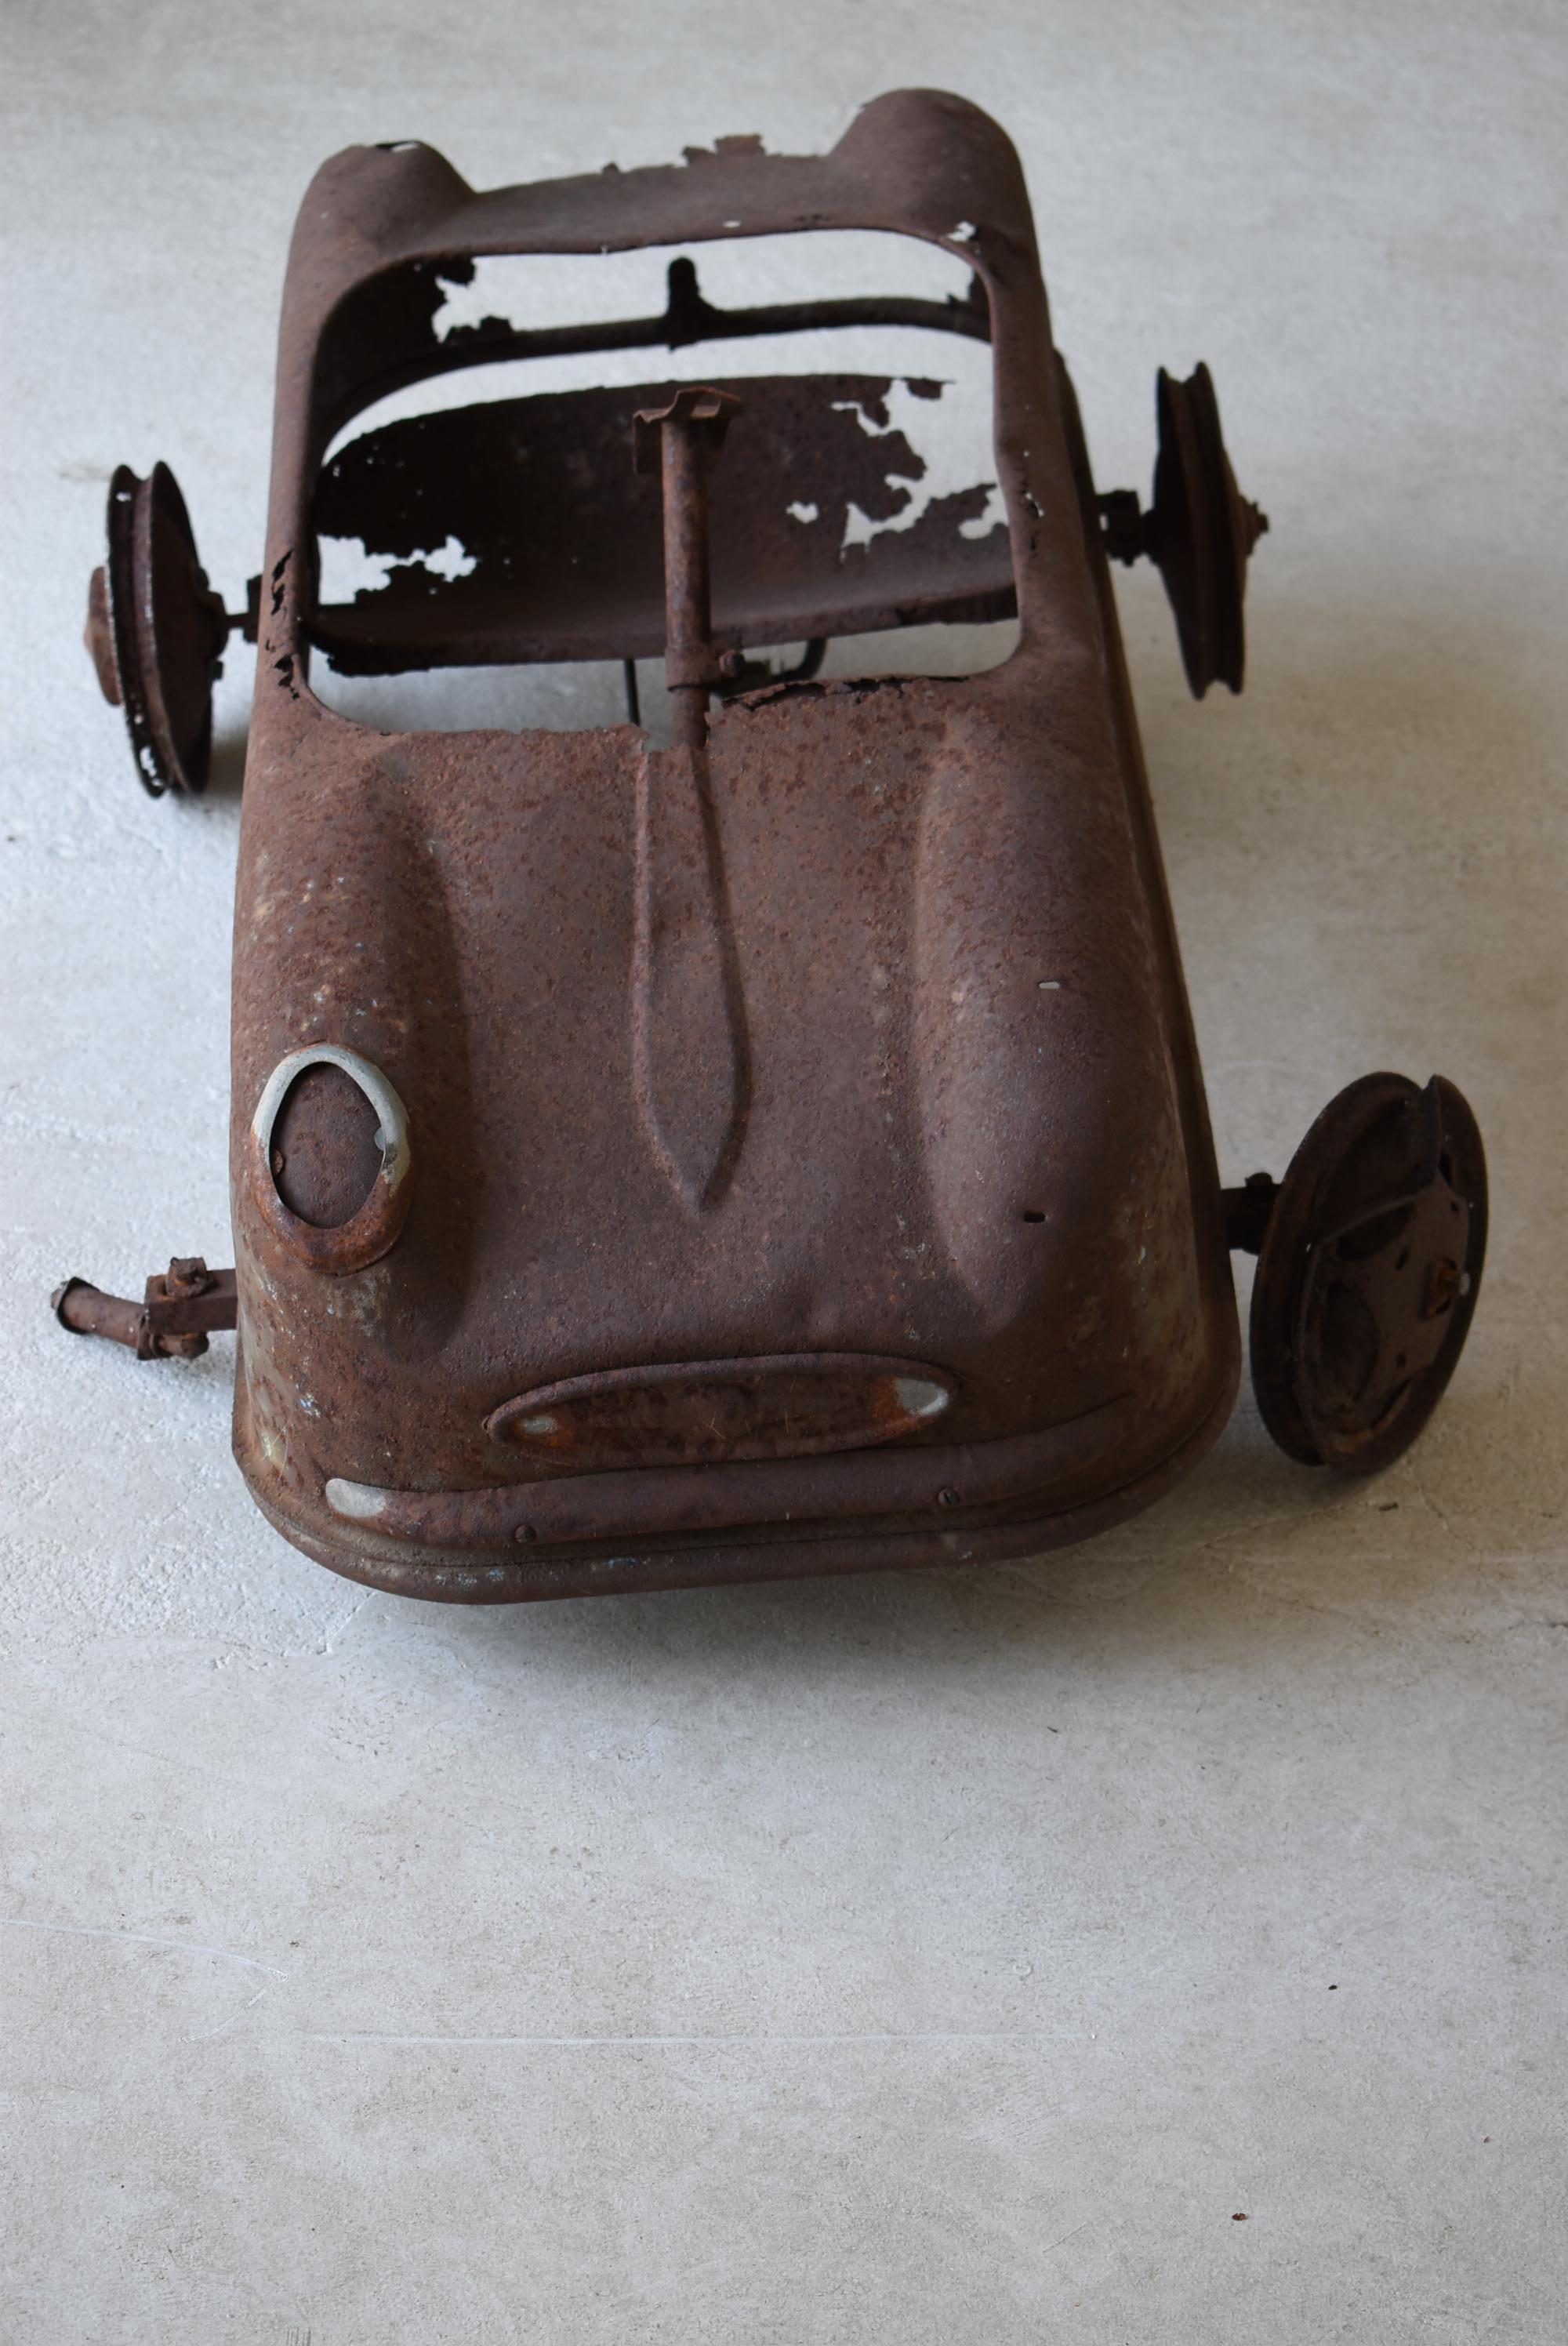 Japanese antique Rusted Car Toys 1940s-1970s/Figurine Object Wabisabi decor 1